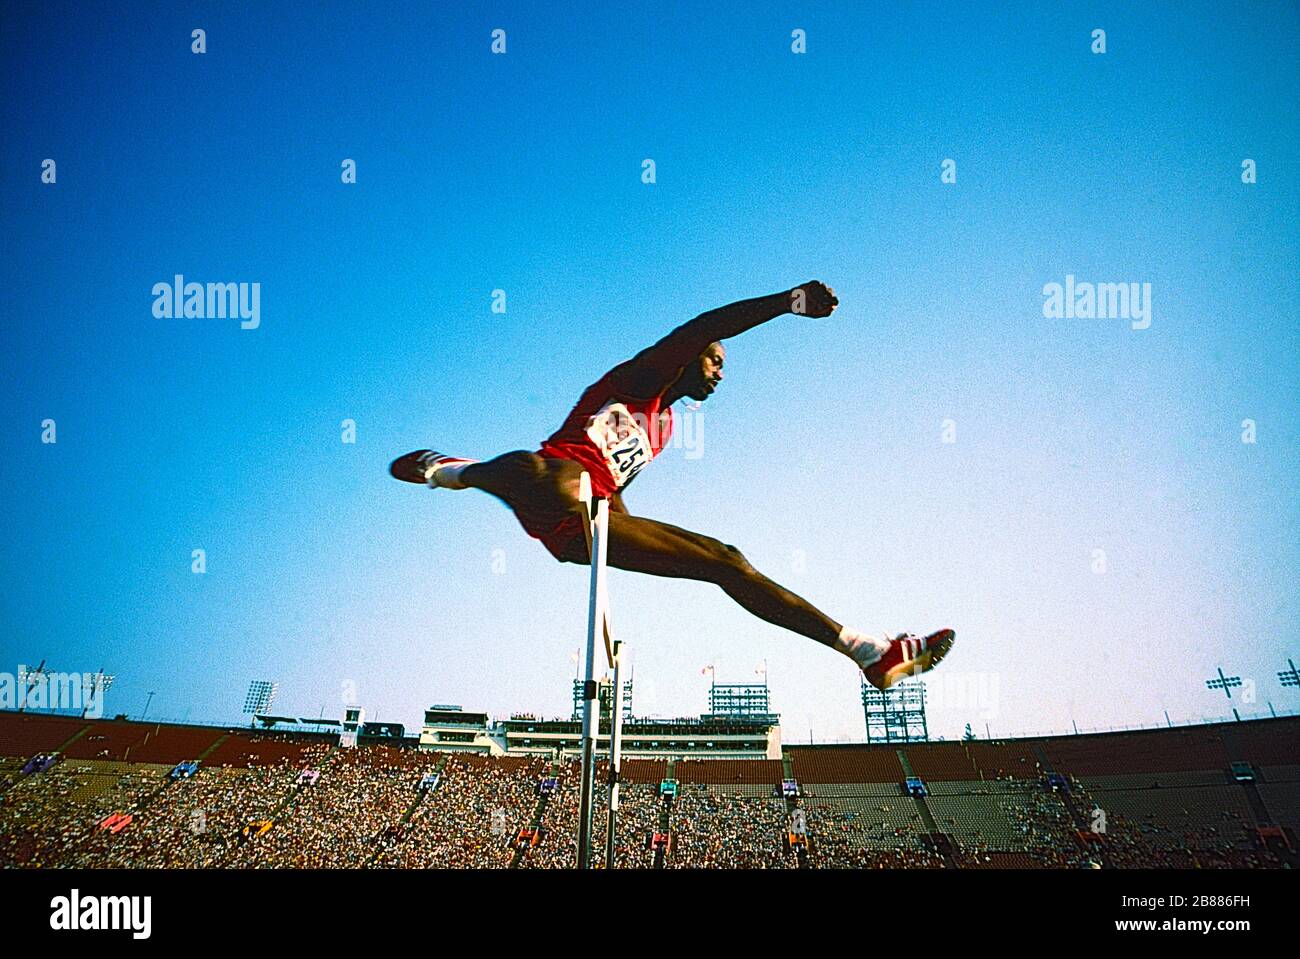 Edwin Moses competing at the 1984 US Olympic Track and Field Team Trials Stock Photo